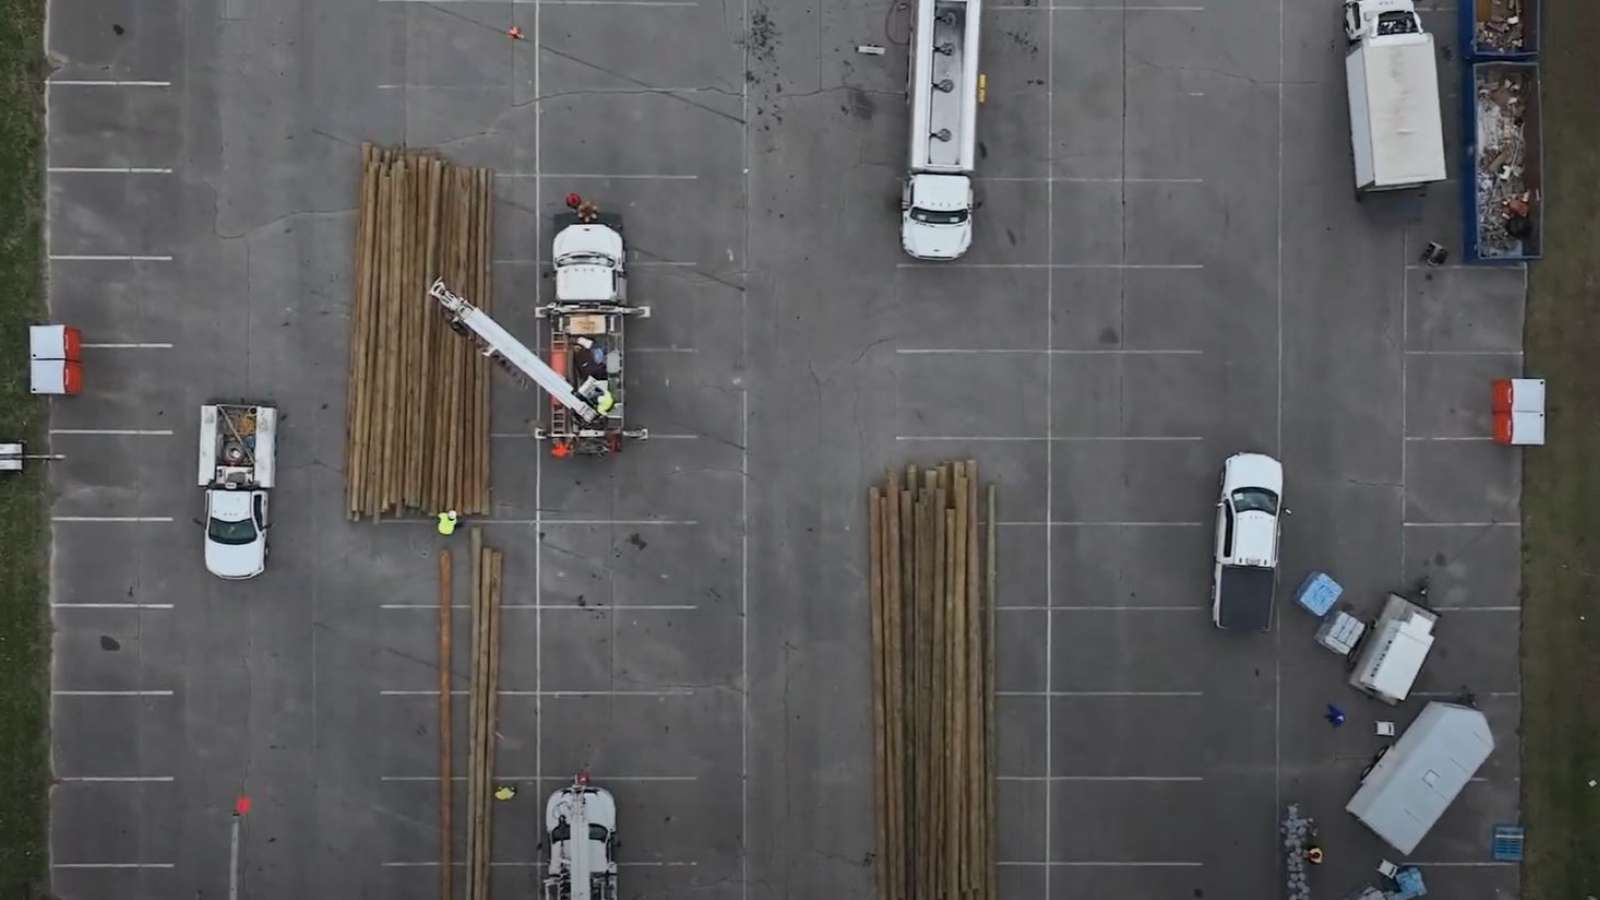 aerial view of parking lot with trucks and power poles